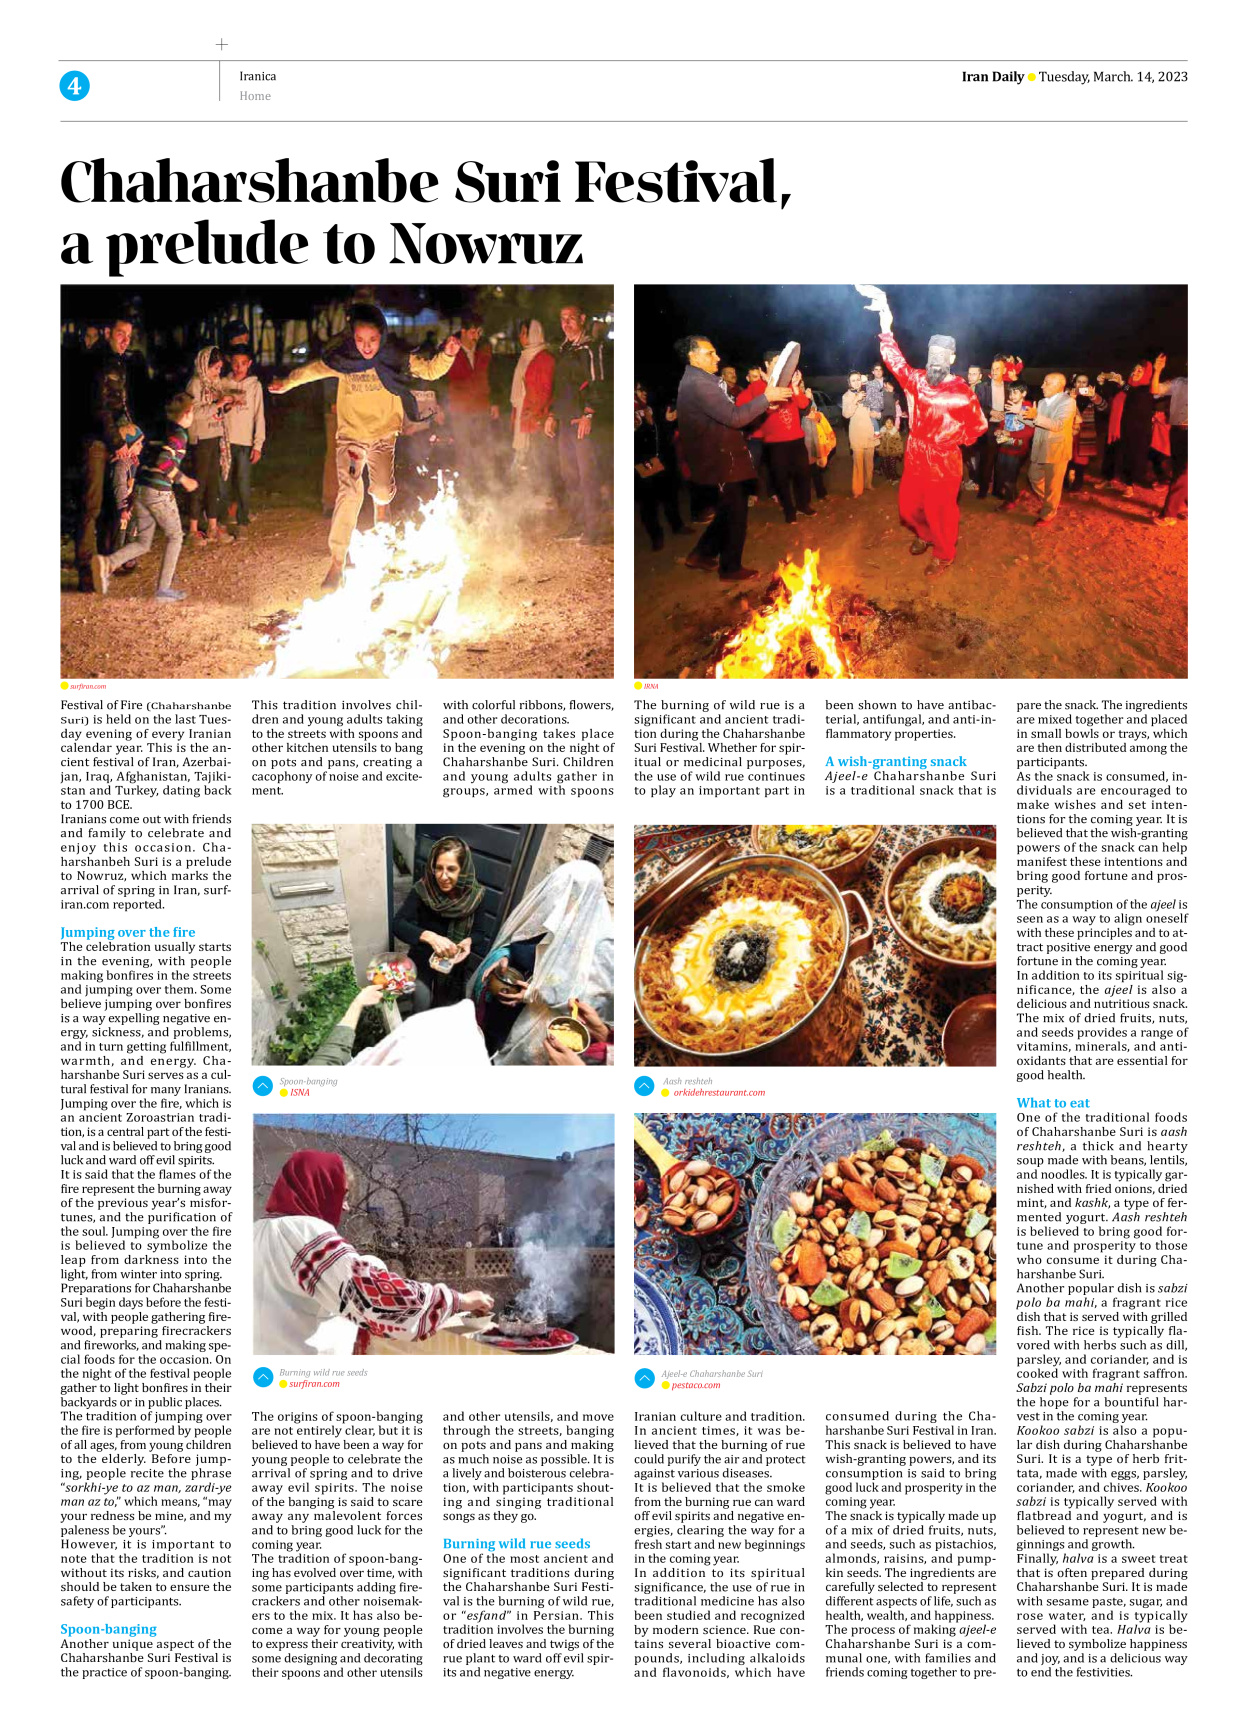 Iran Daily - Number Seven Thousand Two Hundred and Fifty Seven - 14 March 2023 - Page 4